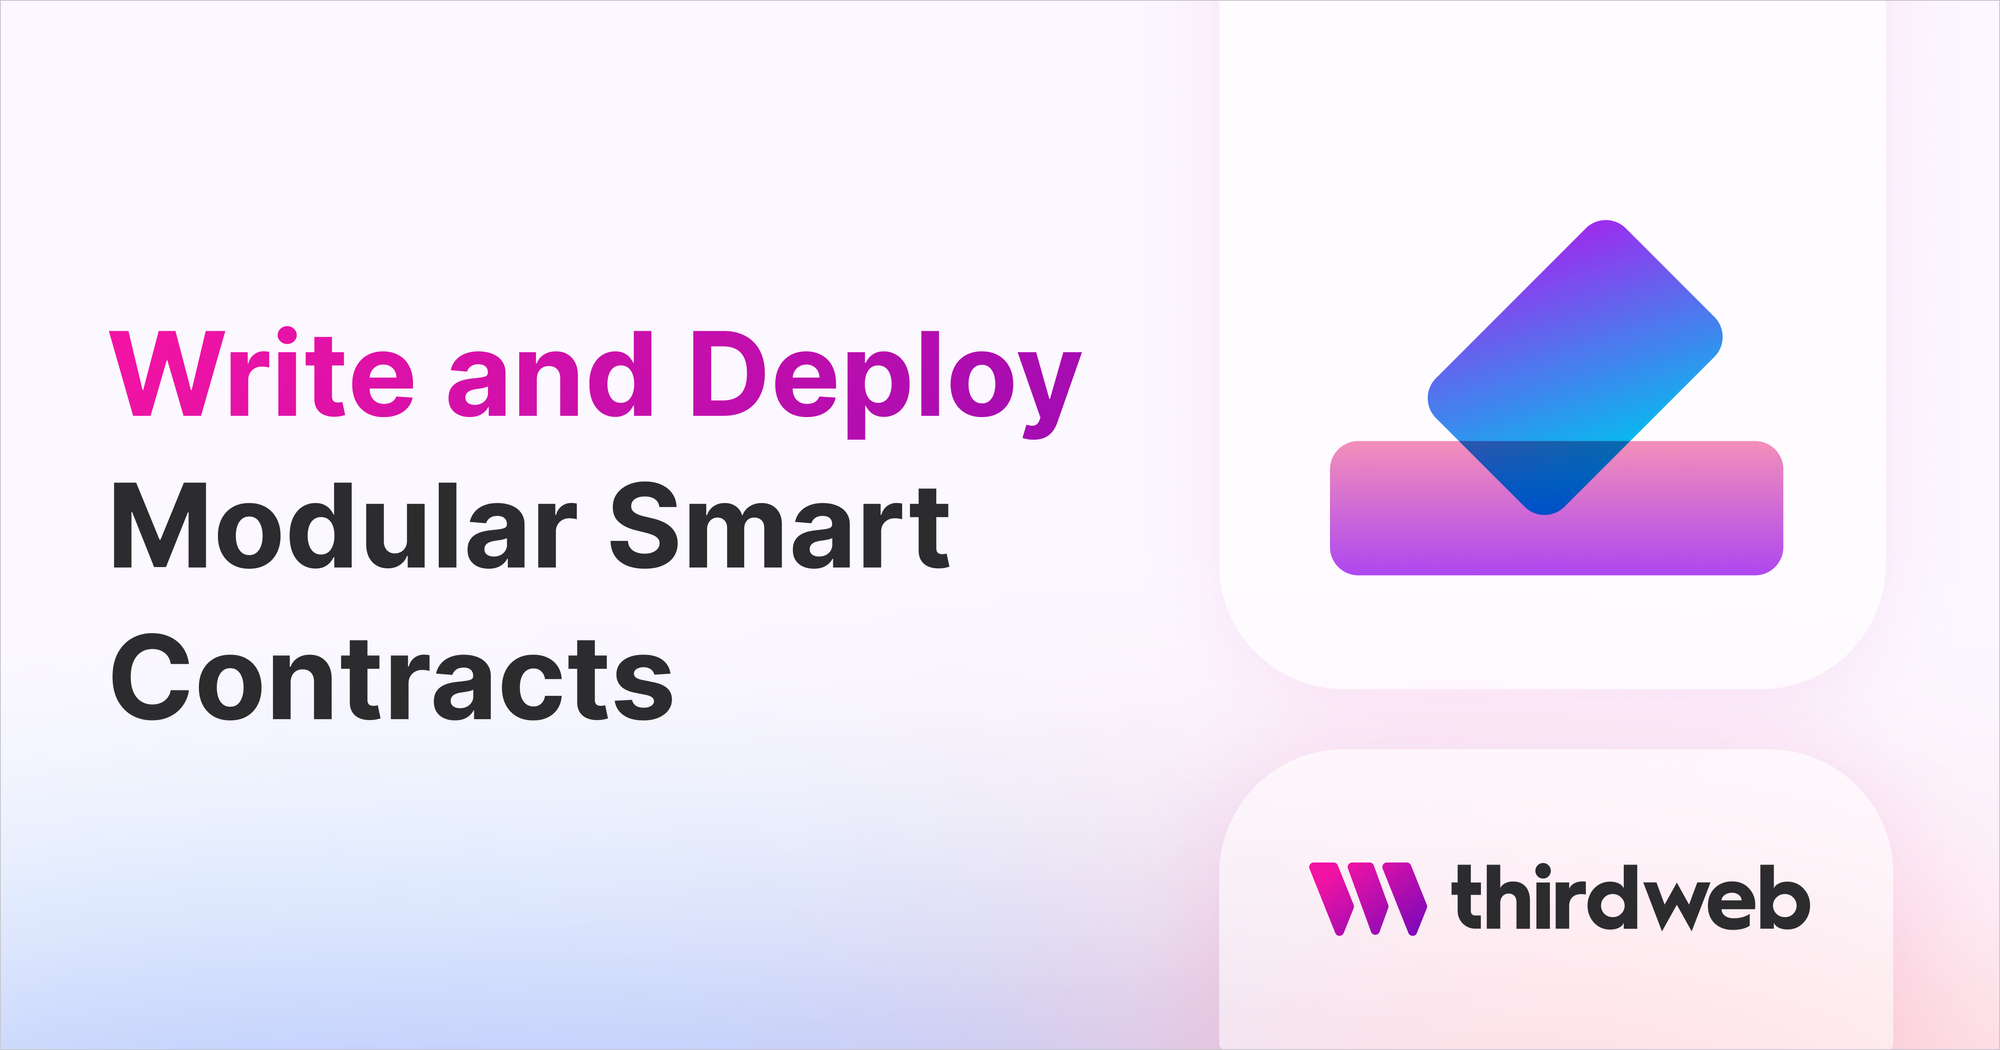 Guide: write and deploy Modular Smart Contracts.